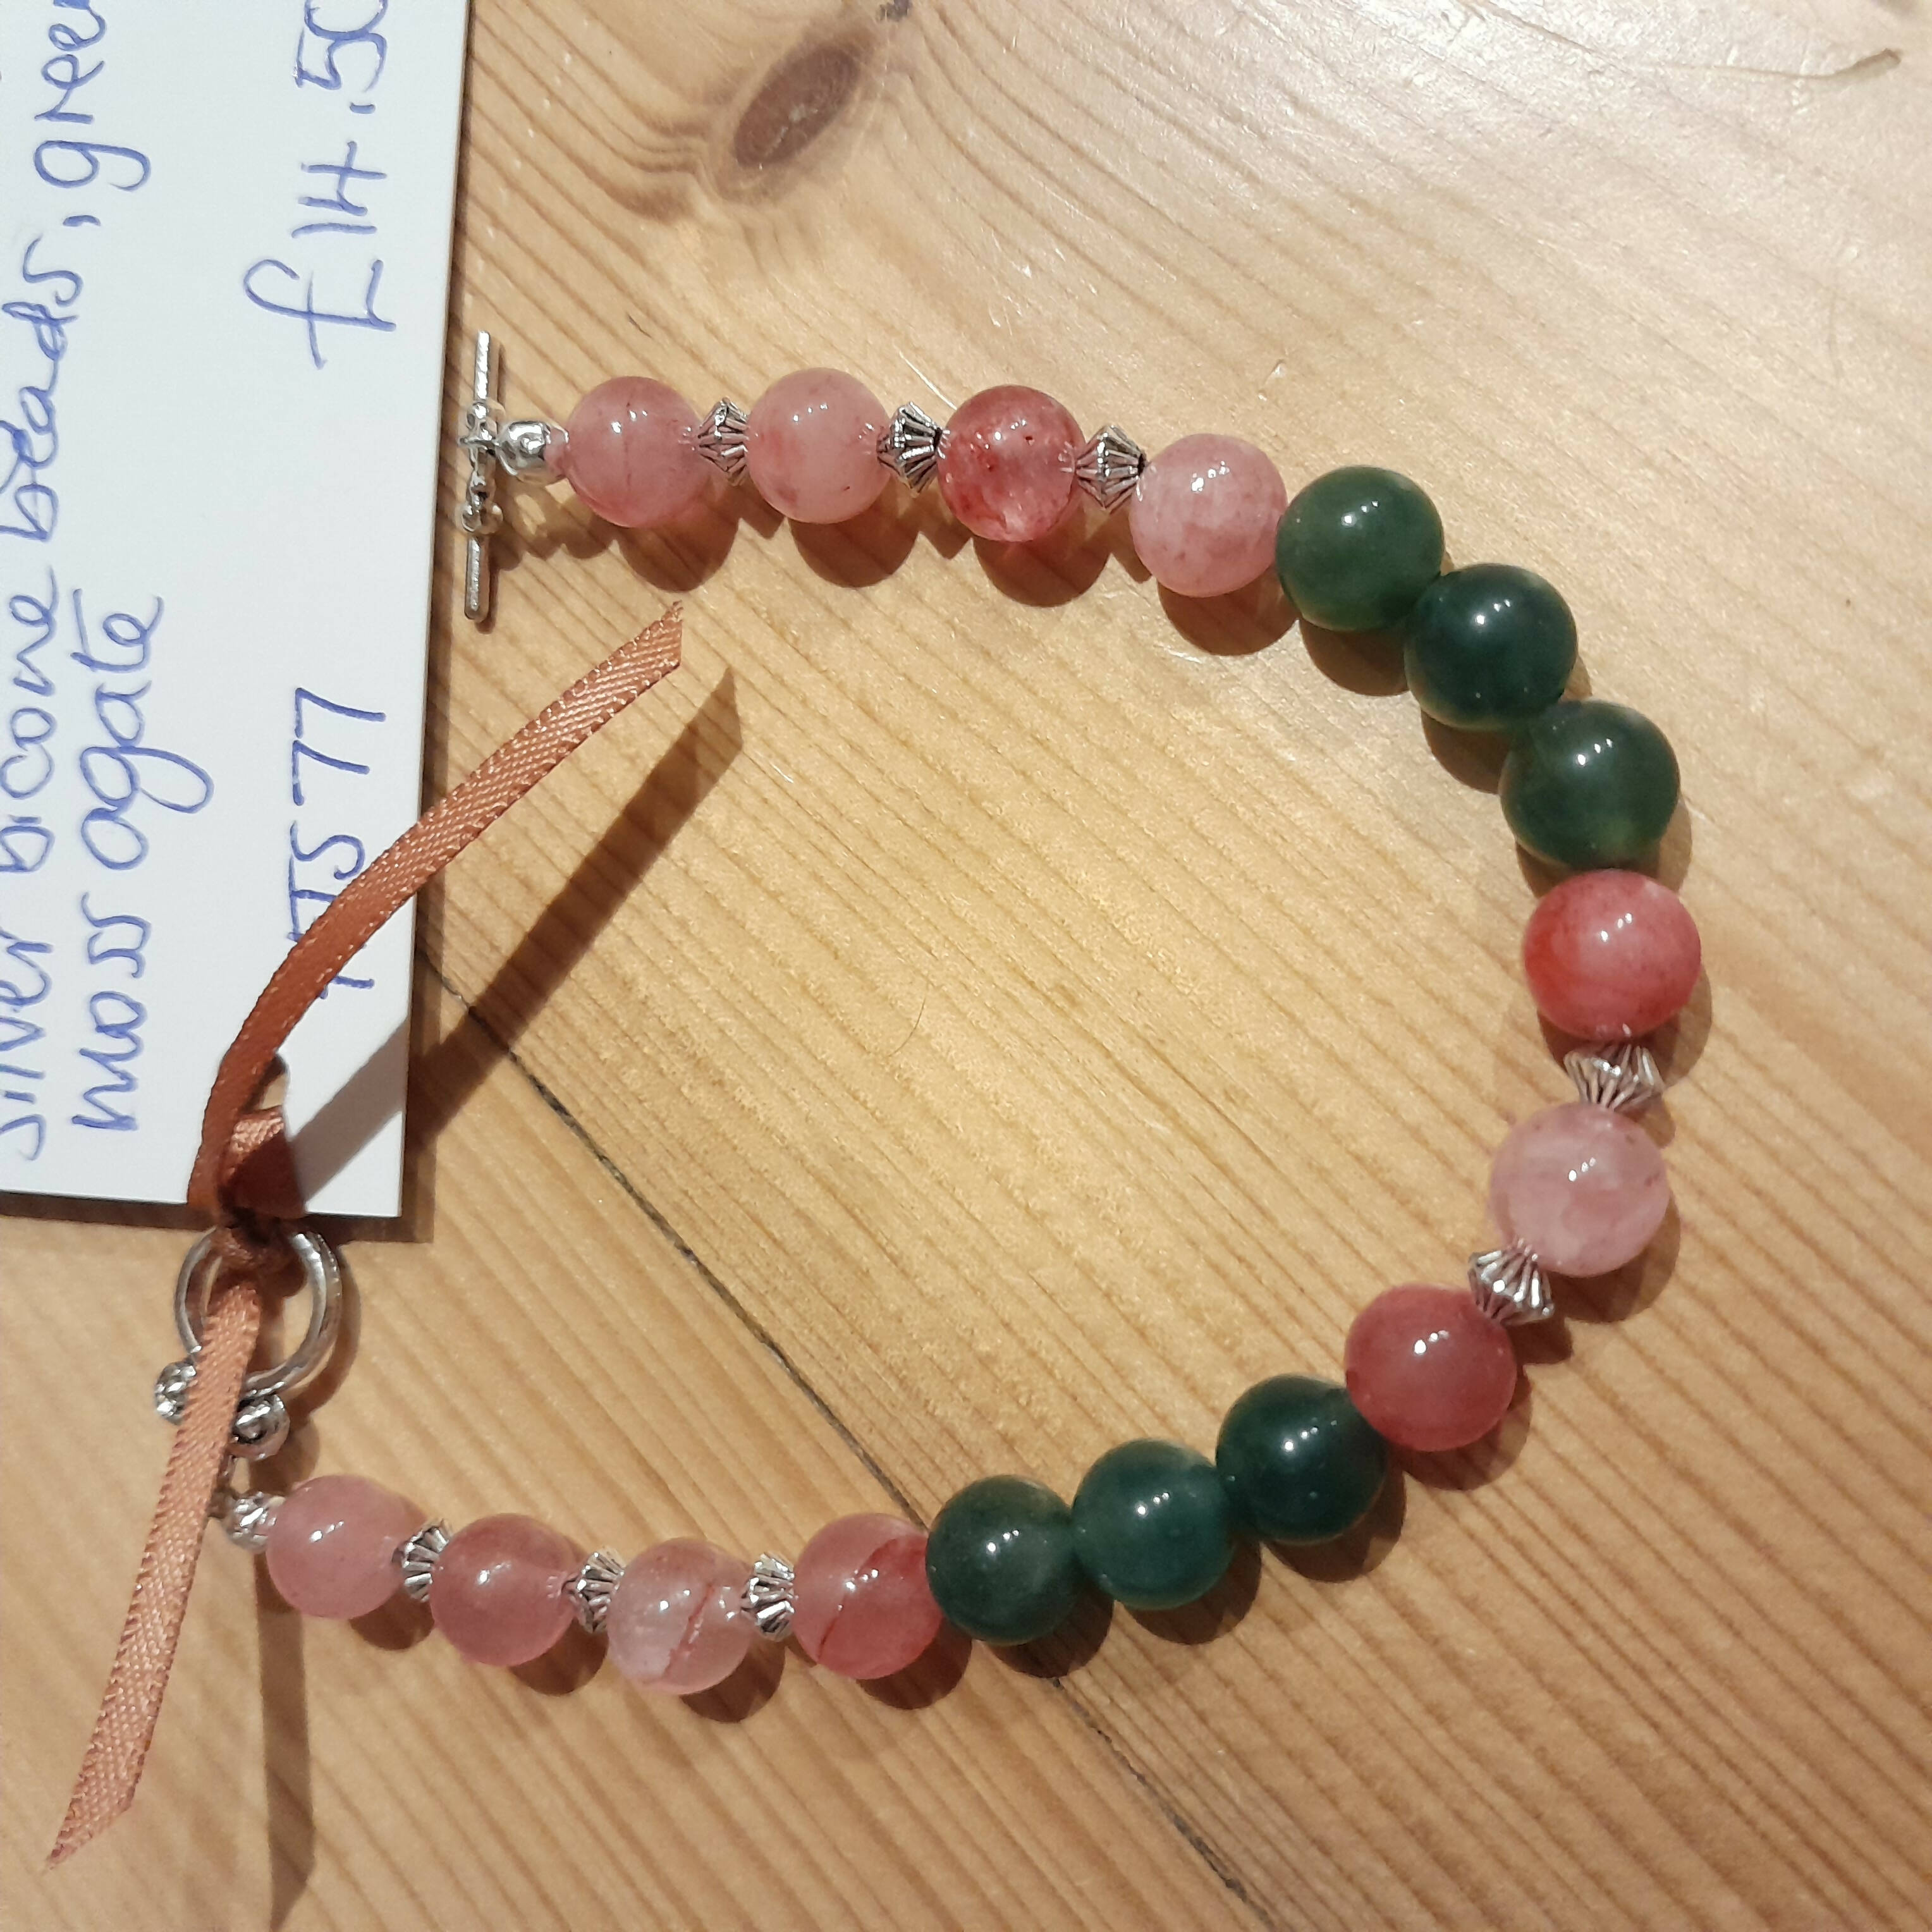 Tibetan Silver Toggle Clasp Bracelet with Pink/Brown Agate, Tibetan Silver Bacon Beads and Moss Green Agate